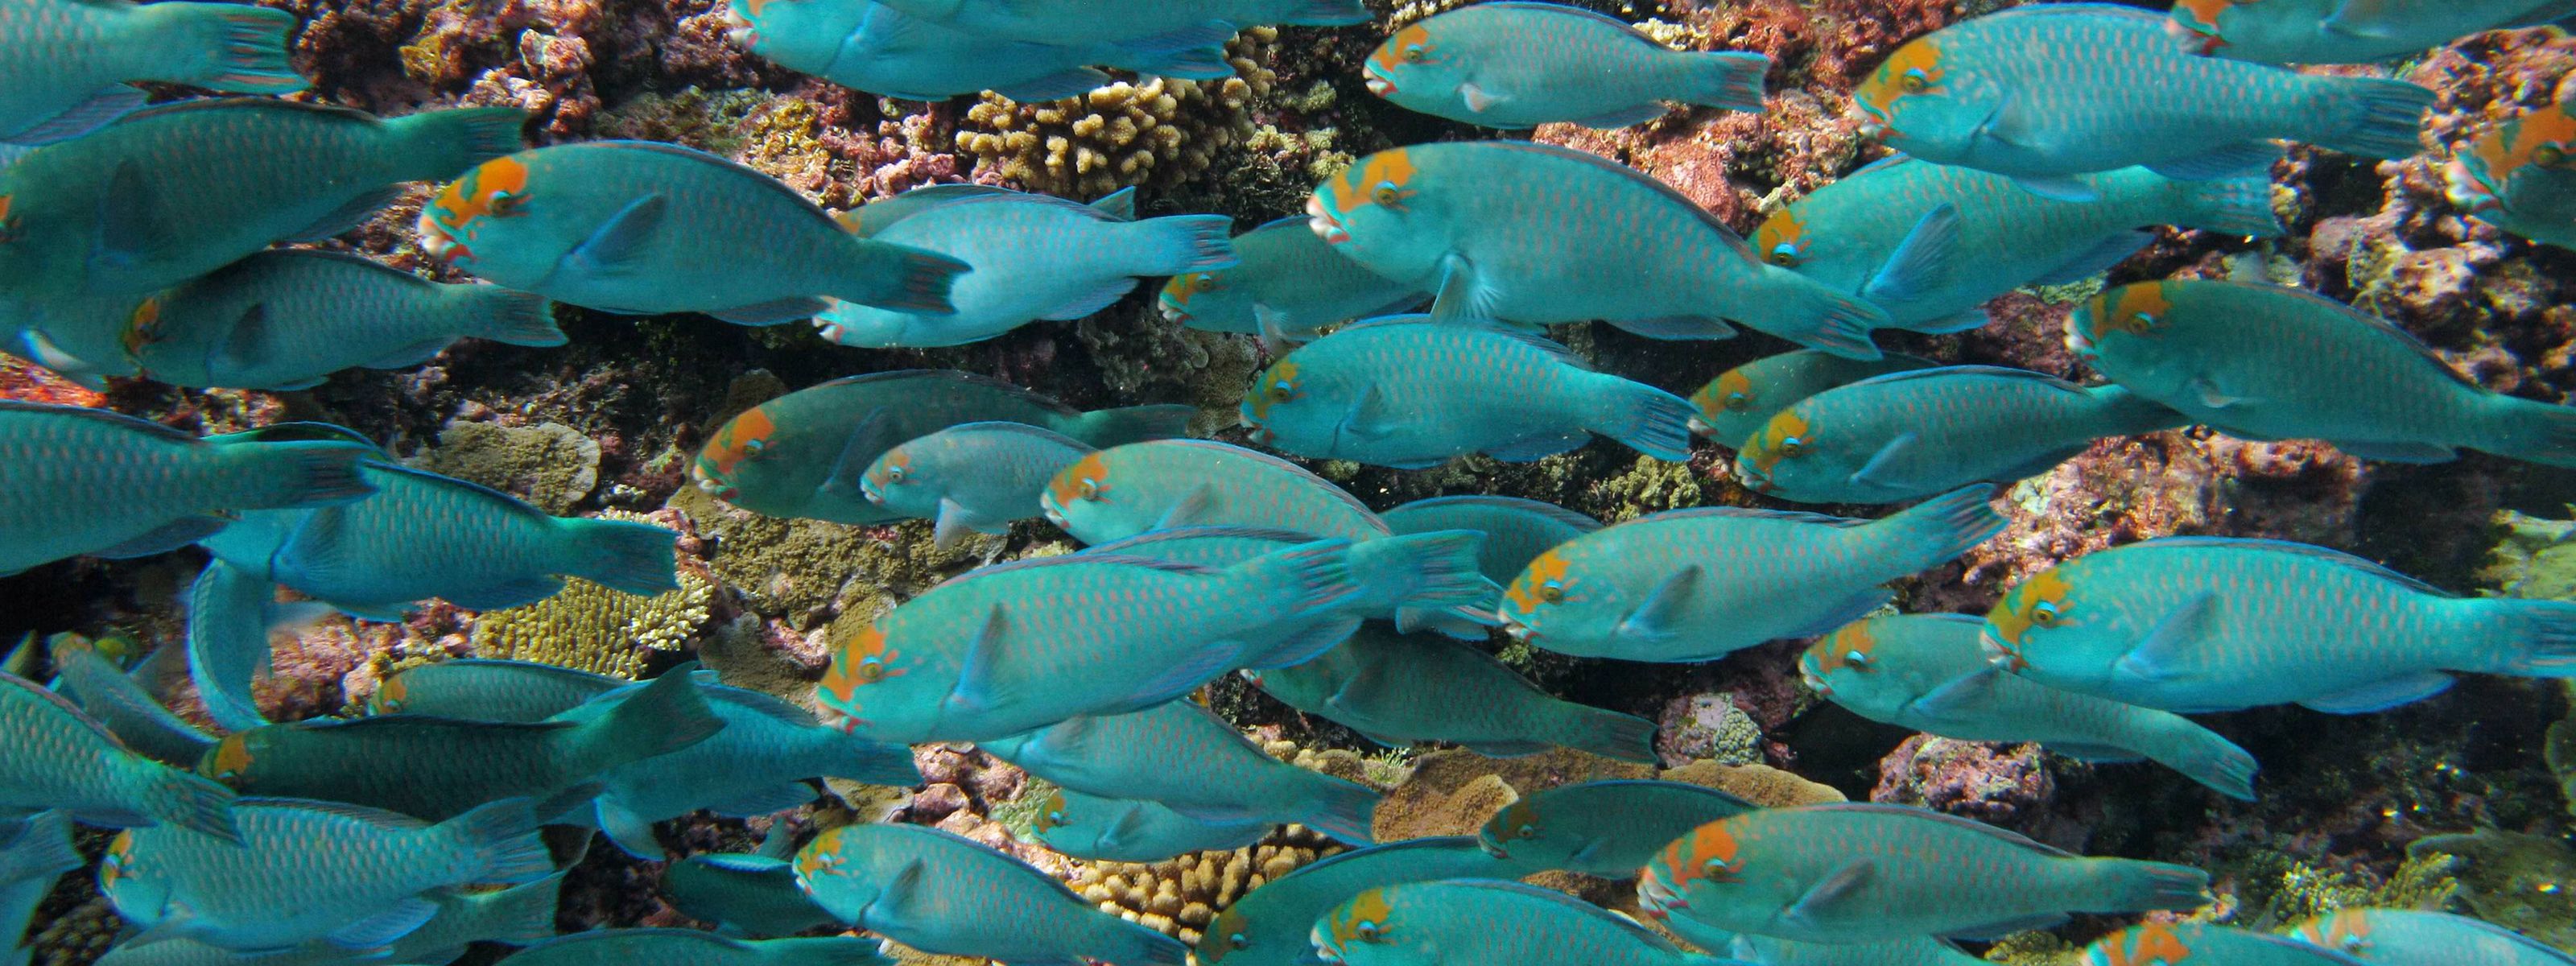 A school of colorful parrotfish.